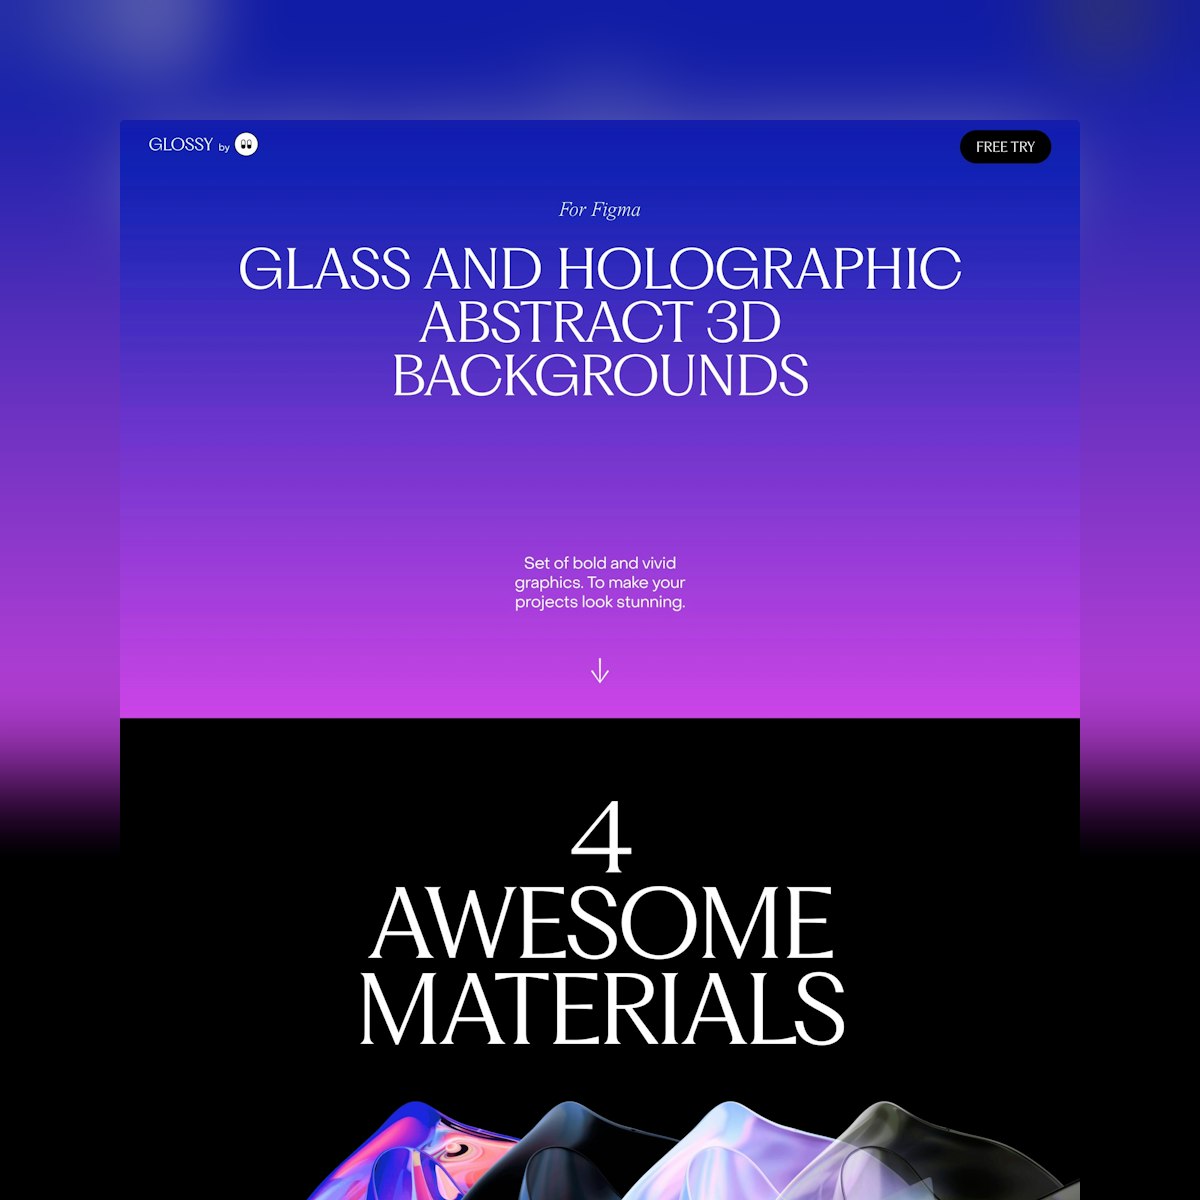 Product Page screen design idea #299: Website Inspiration: Holographic Abstract 3D Backgrounds